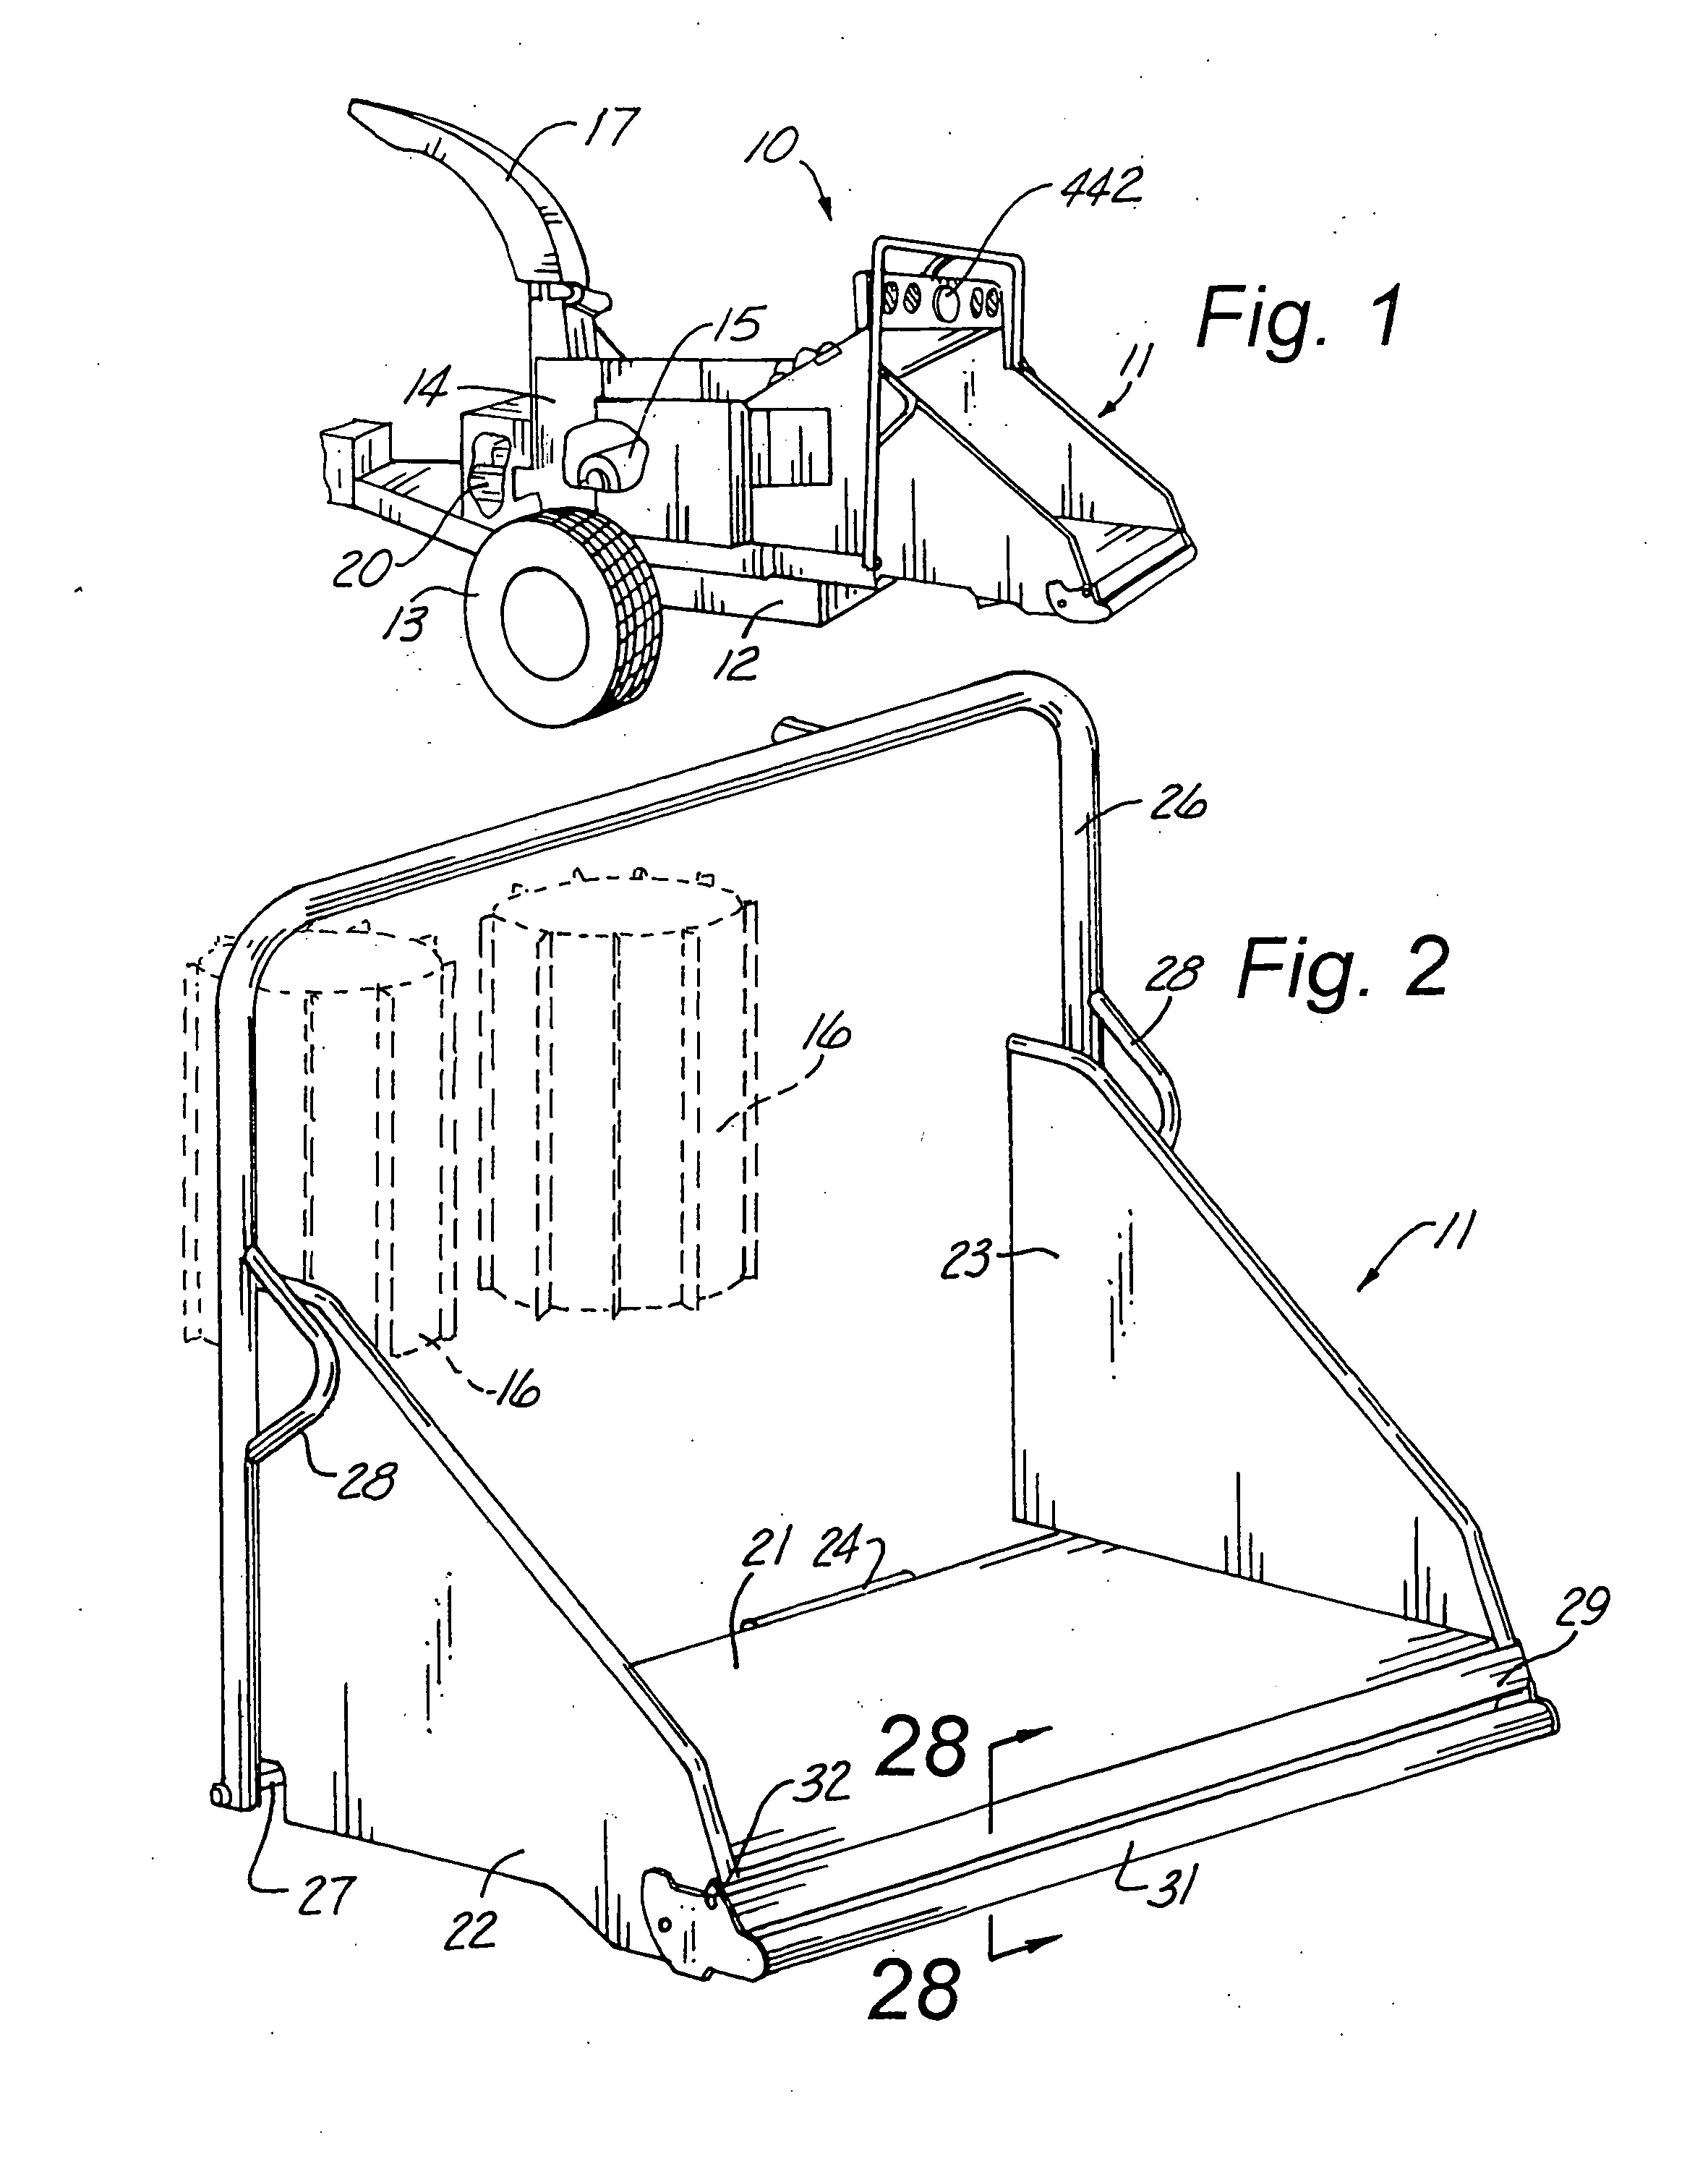 Brush chipper and methods of operating same